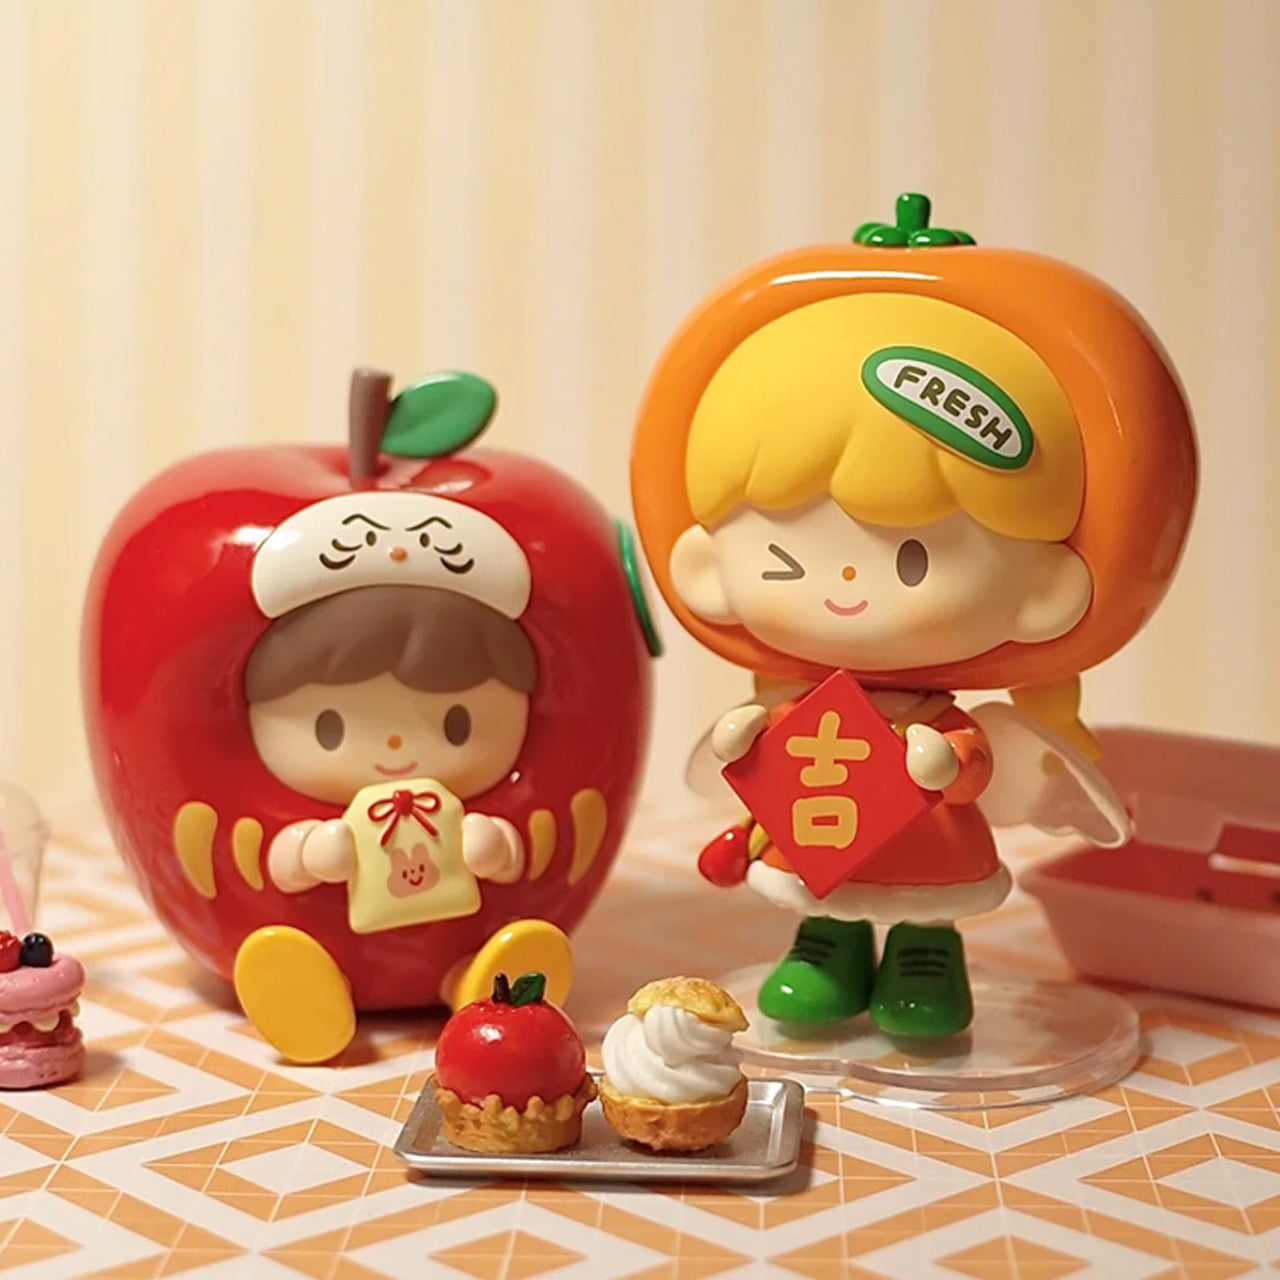 【F.UN】ZZOTON Blessing For Fruit Series Blind Box